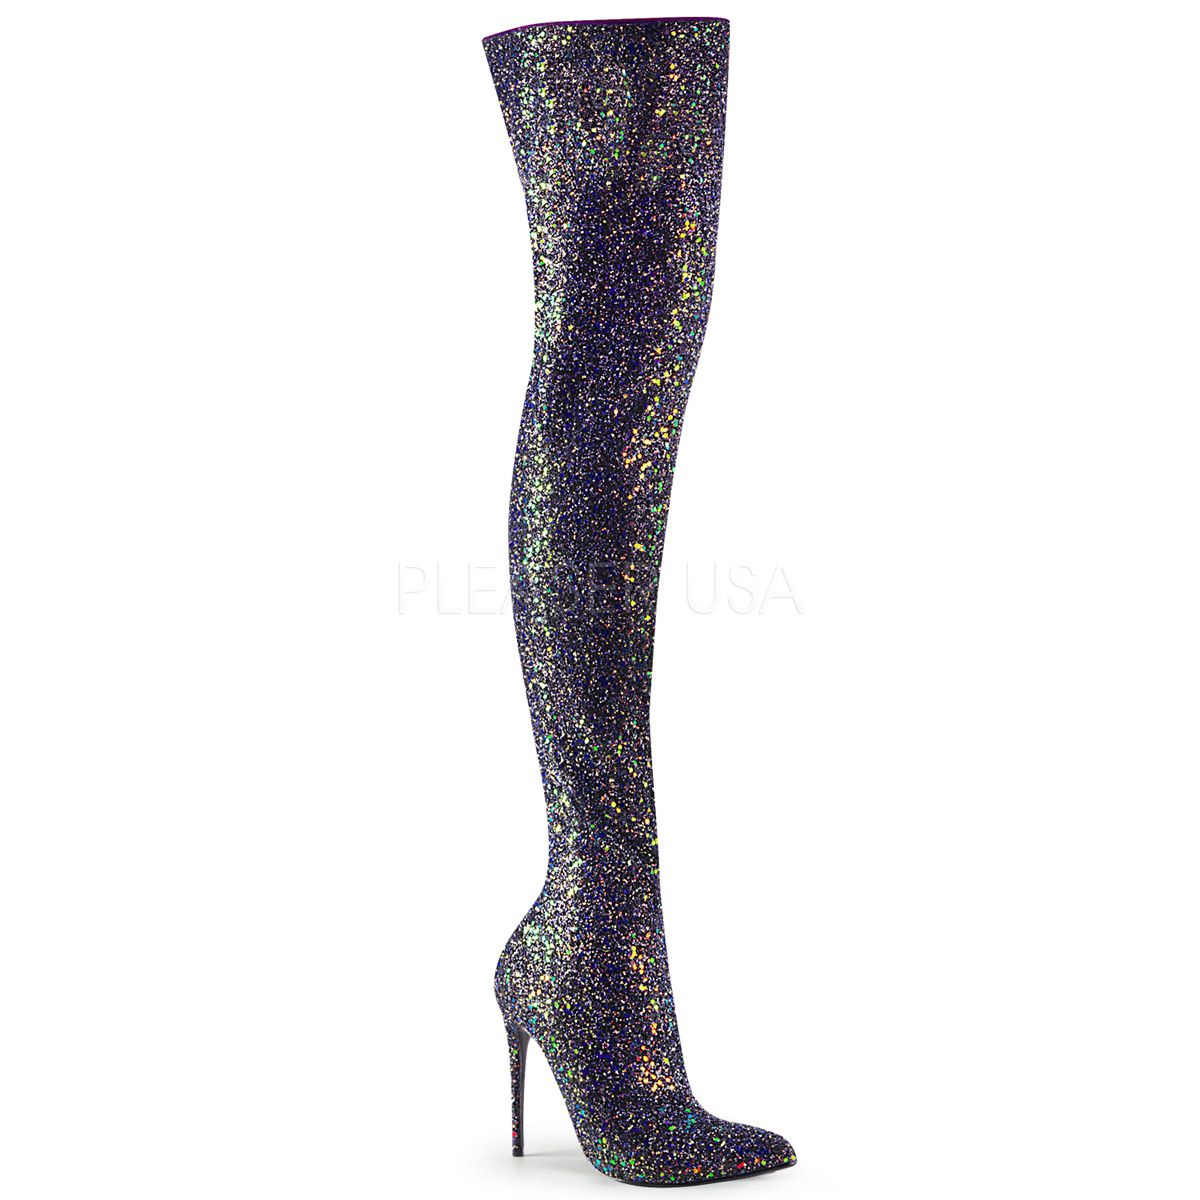 thigh high shimmer boots